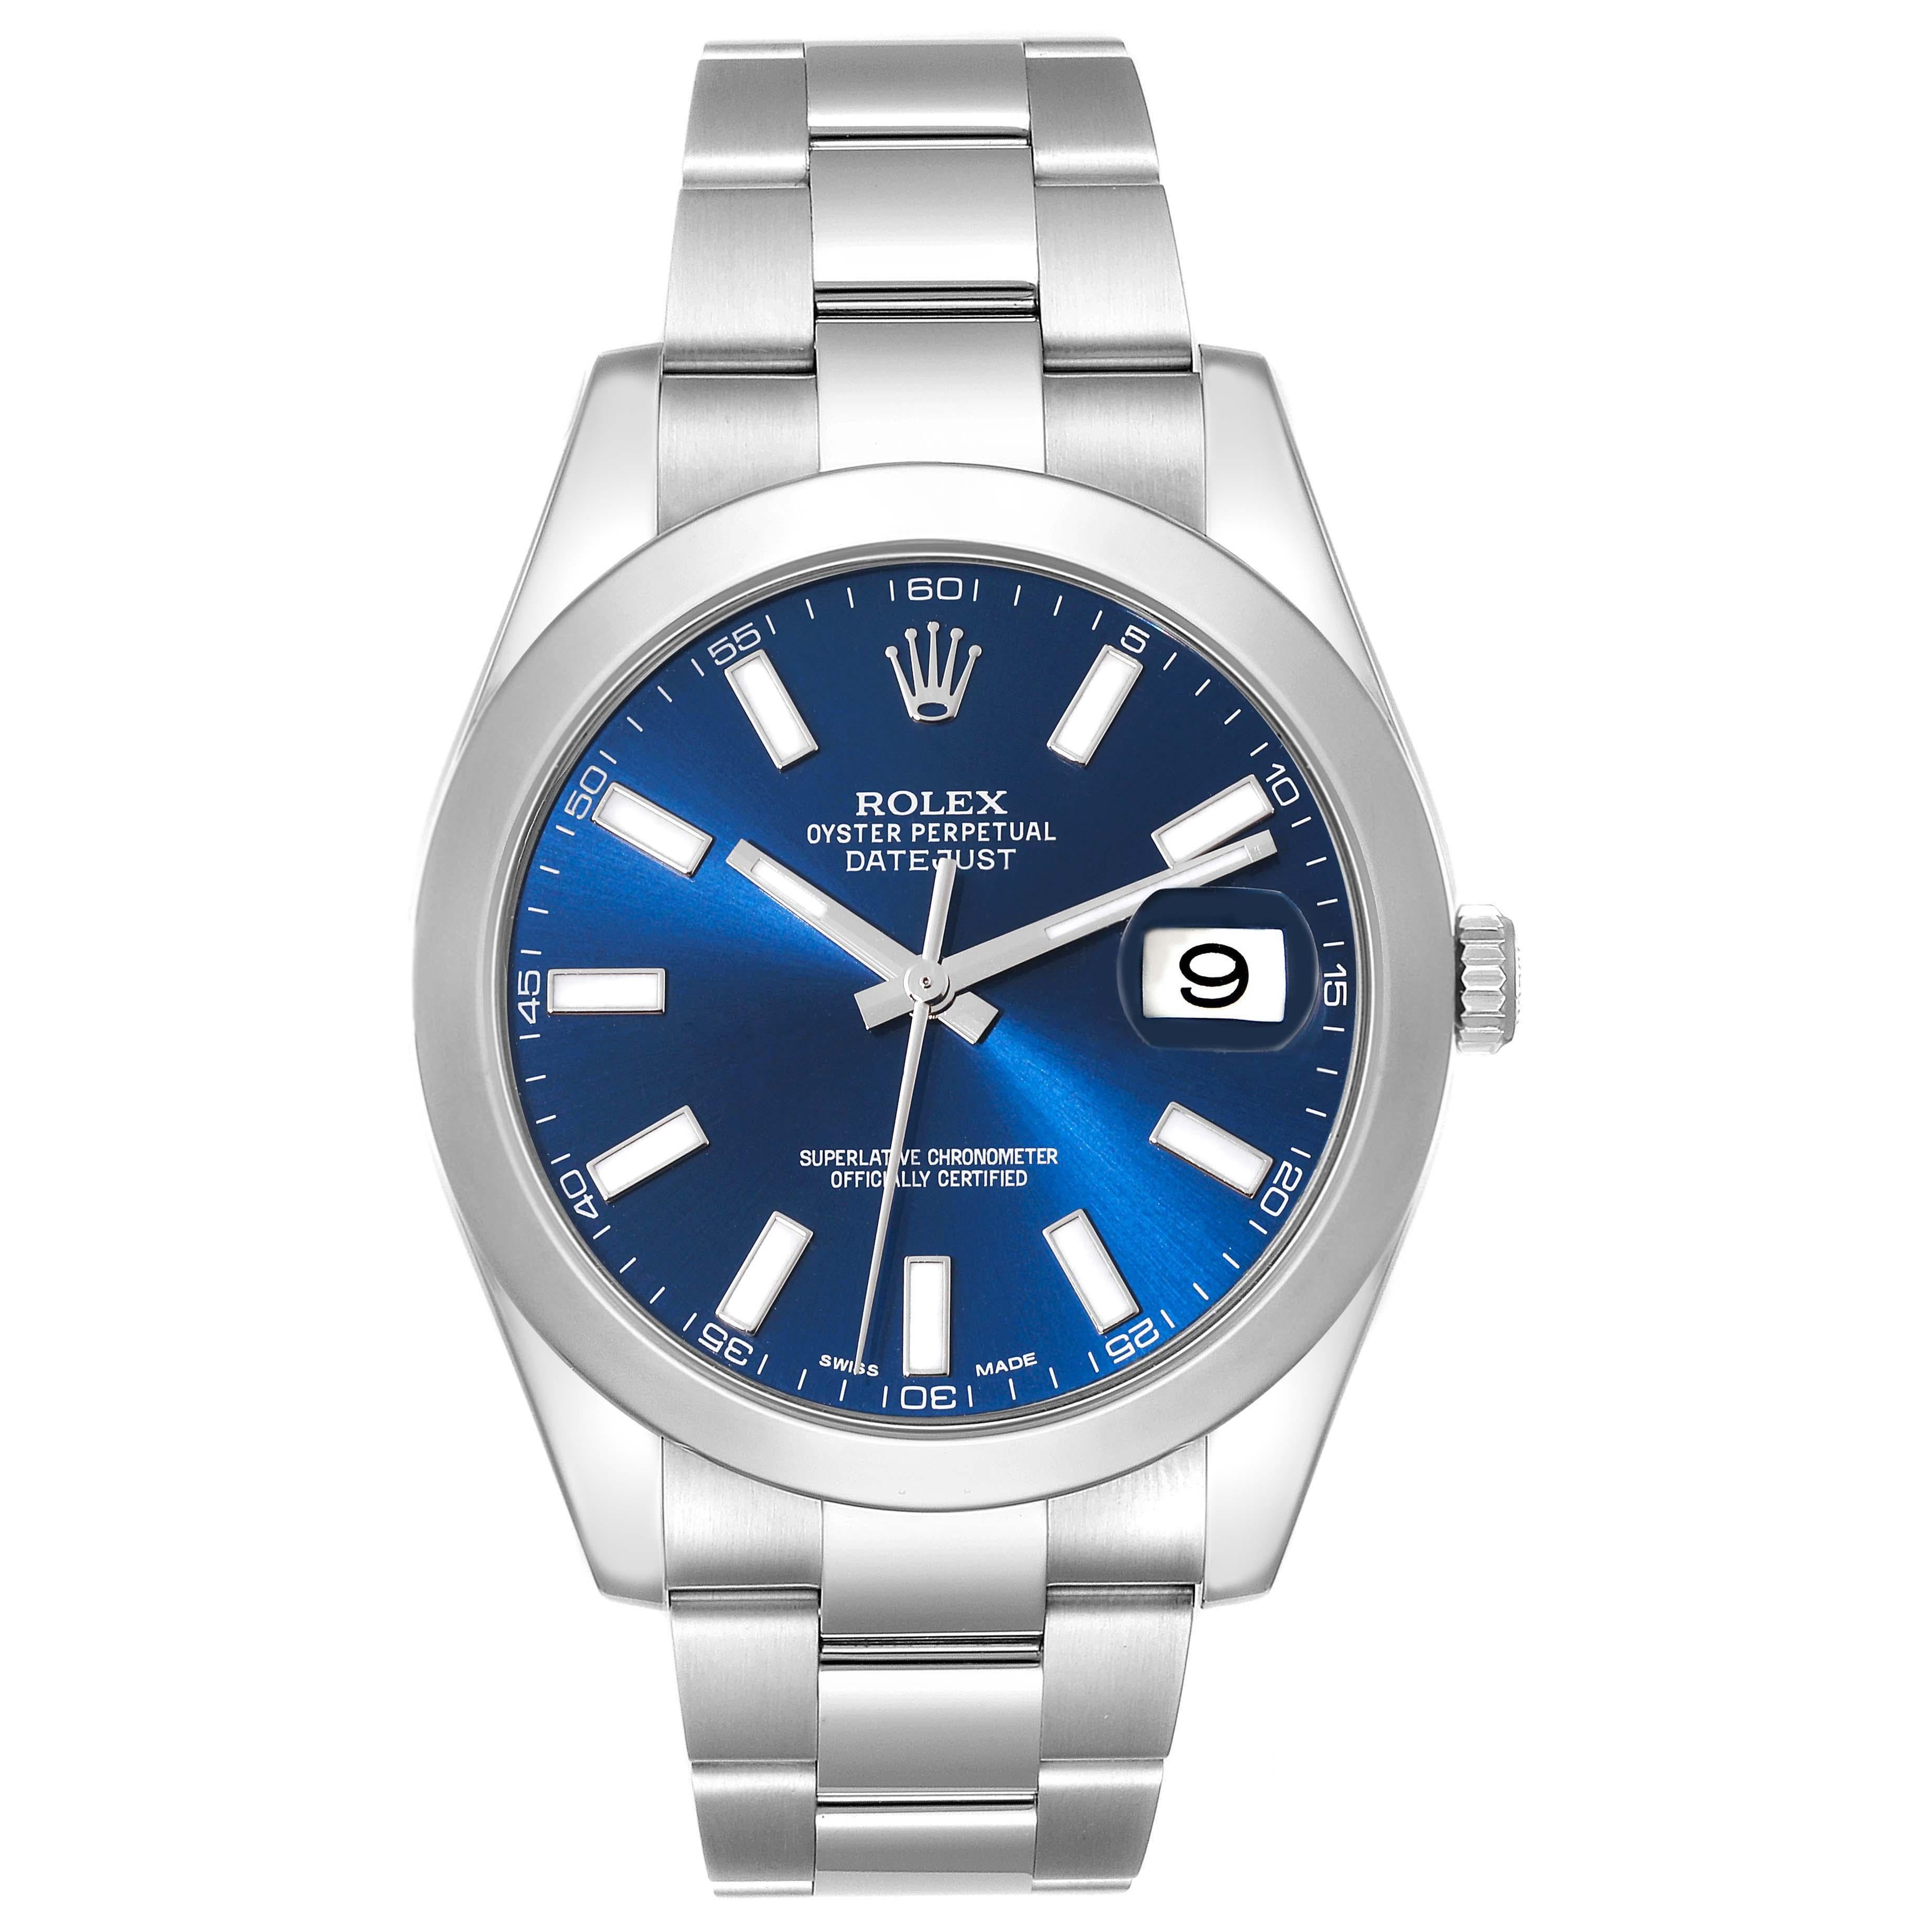 Rolex Datejust II 41 Blue Dial Oyster Bracelet Steel Mens Watch 116300. Officially certified chronometer automatic self-winding movement. Stainless steel case 41 mm in diameter. Rolex logo on the crown. Stainless steel smooth bezel. Scratch